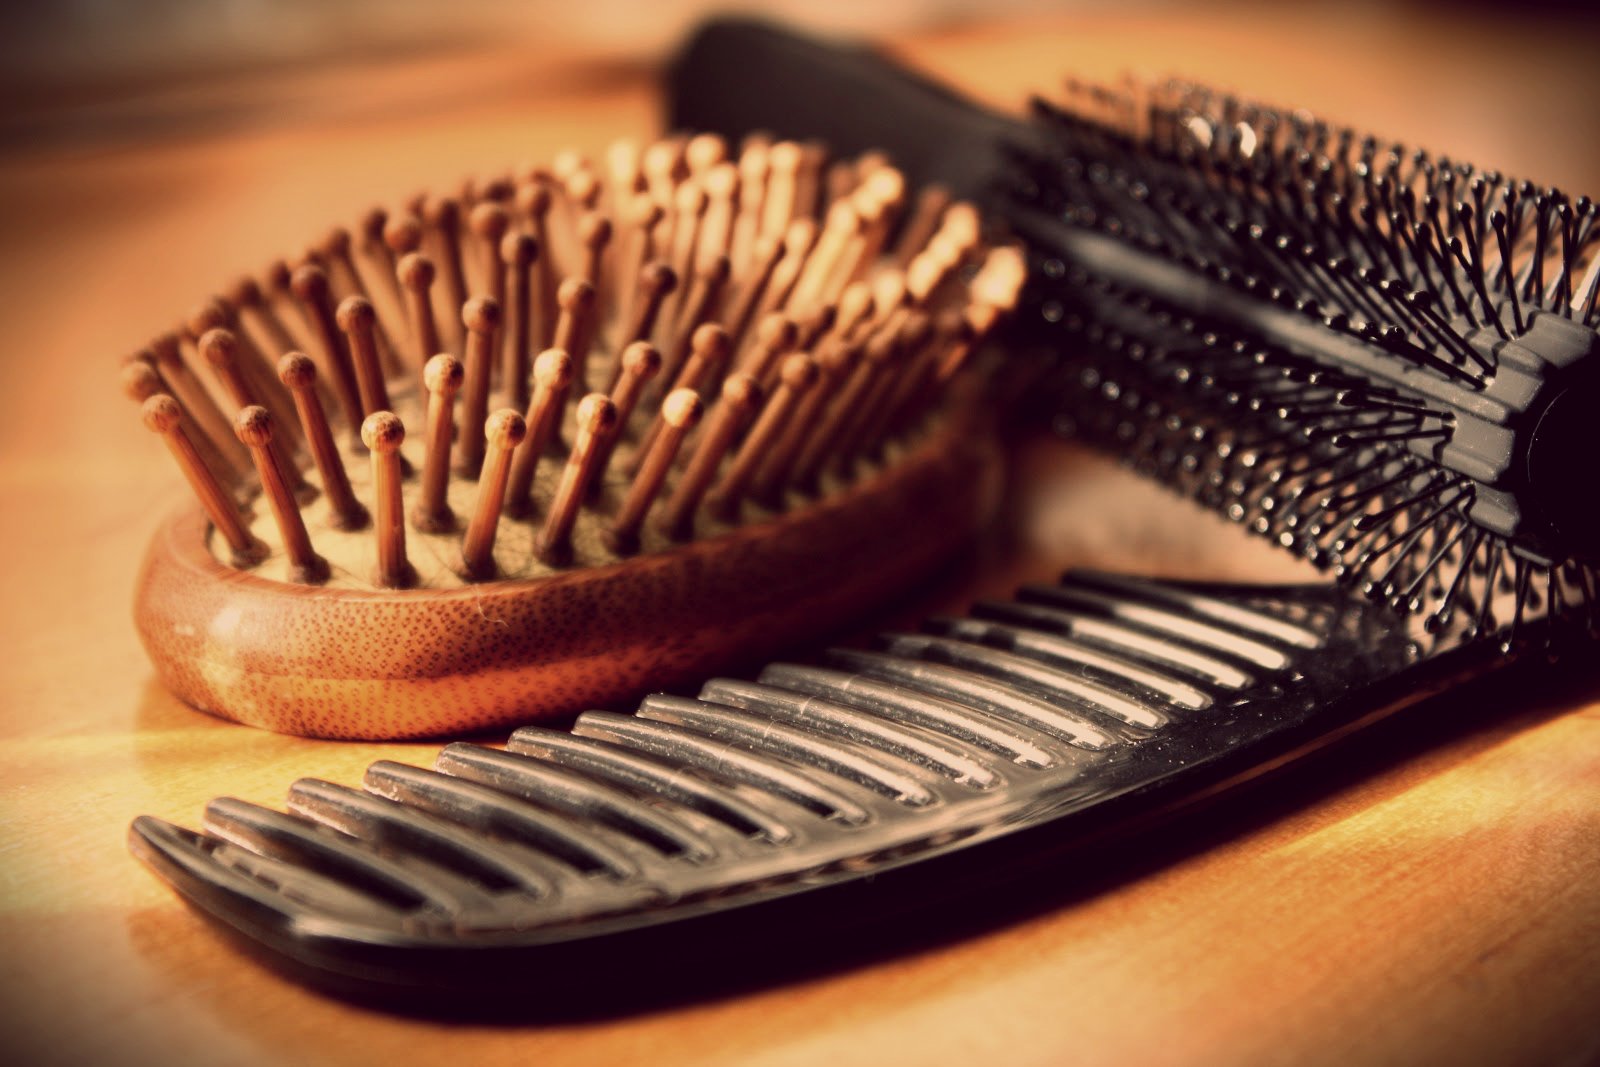 hair brushes and combs